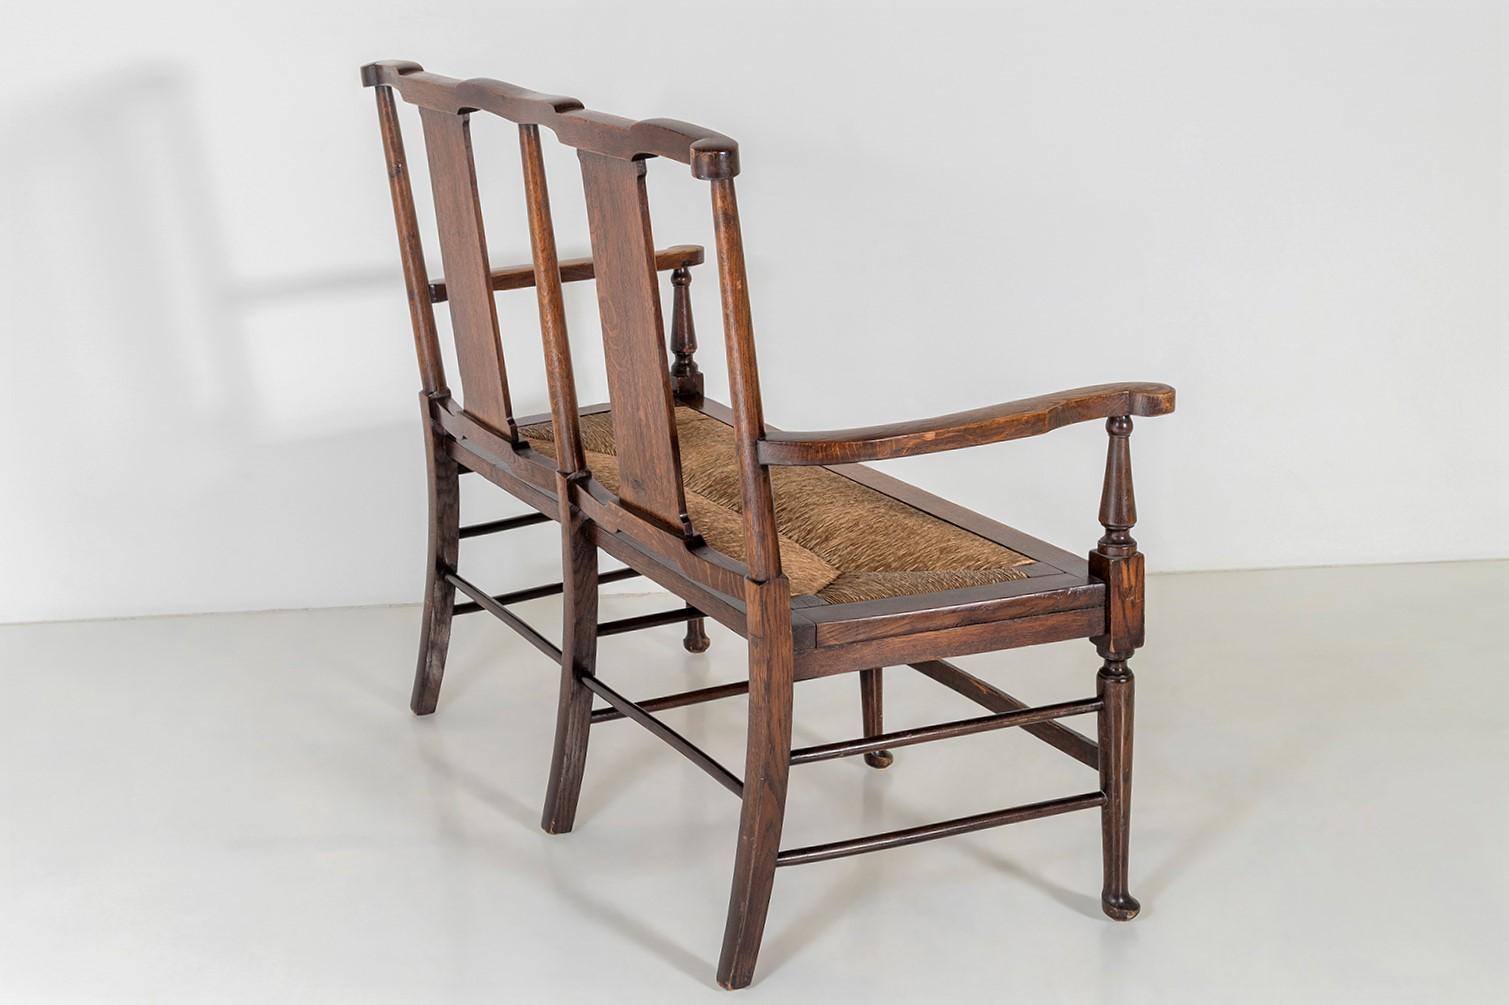 English Oak Arts & Craft Bench with Rush Seat in the manner of William Morris & Co